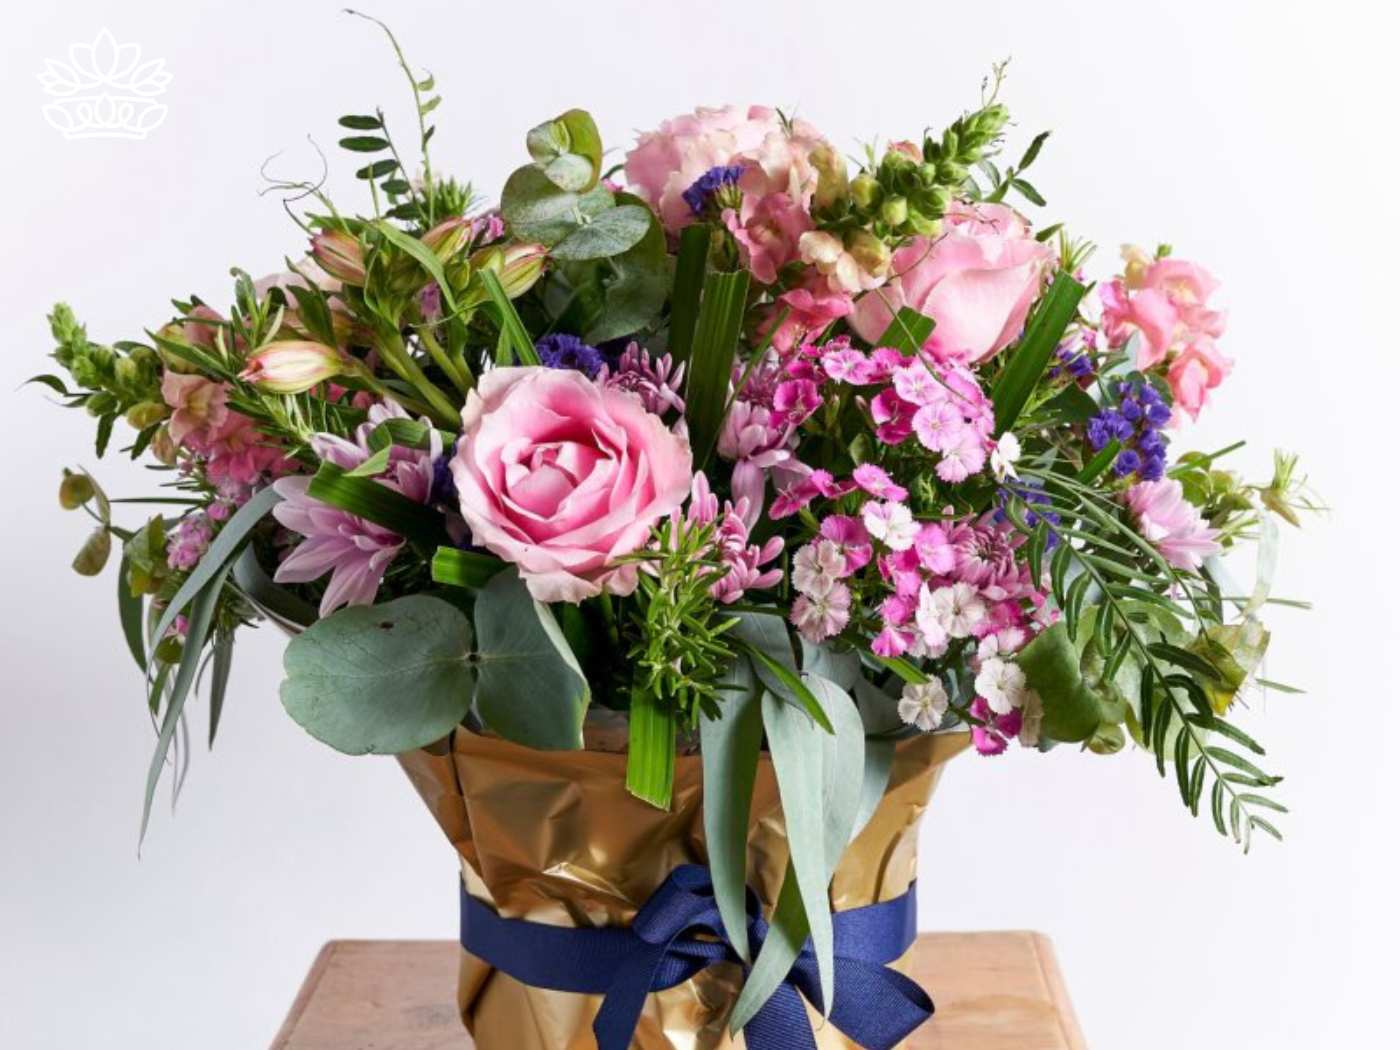 Exquisite bouquet featuring a delicate arrangement of pink roses, hydrangeas, and various lush, mixed flowers, all elegantly tied with a blue ribbon around a golden wrap, placed on a wooden surface. Perfect for adding a touch of refined beauty to guest houses and hotels. Fabulous Flowers and Gifts for Guest House and Hotel Flowers"